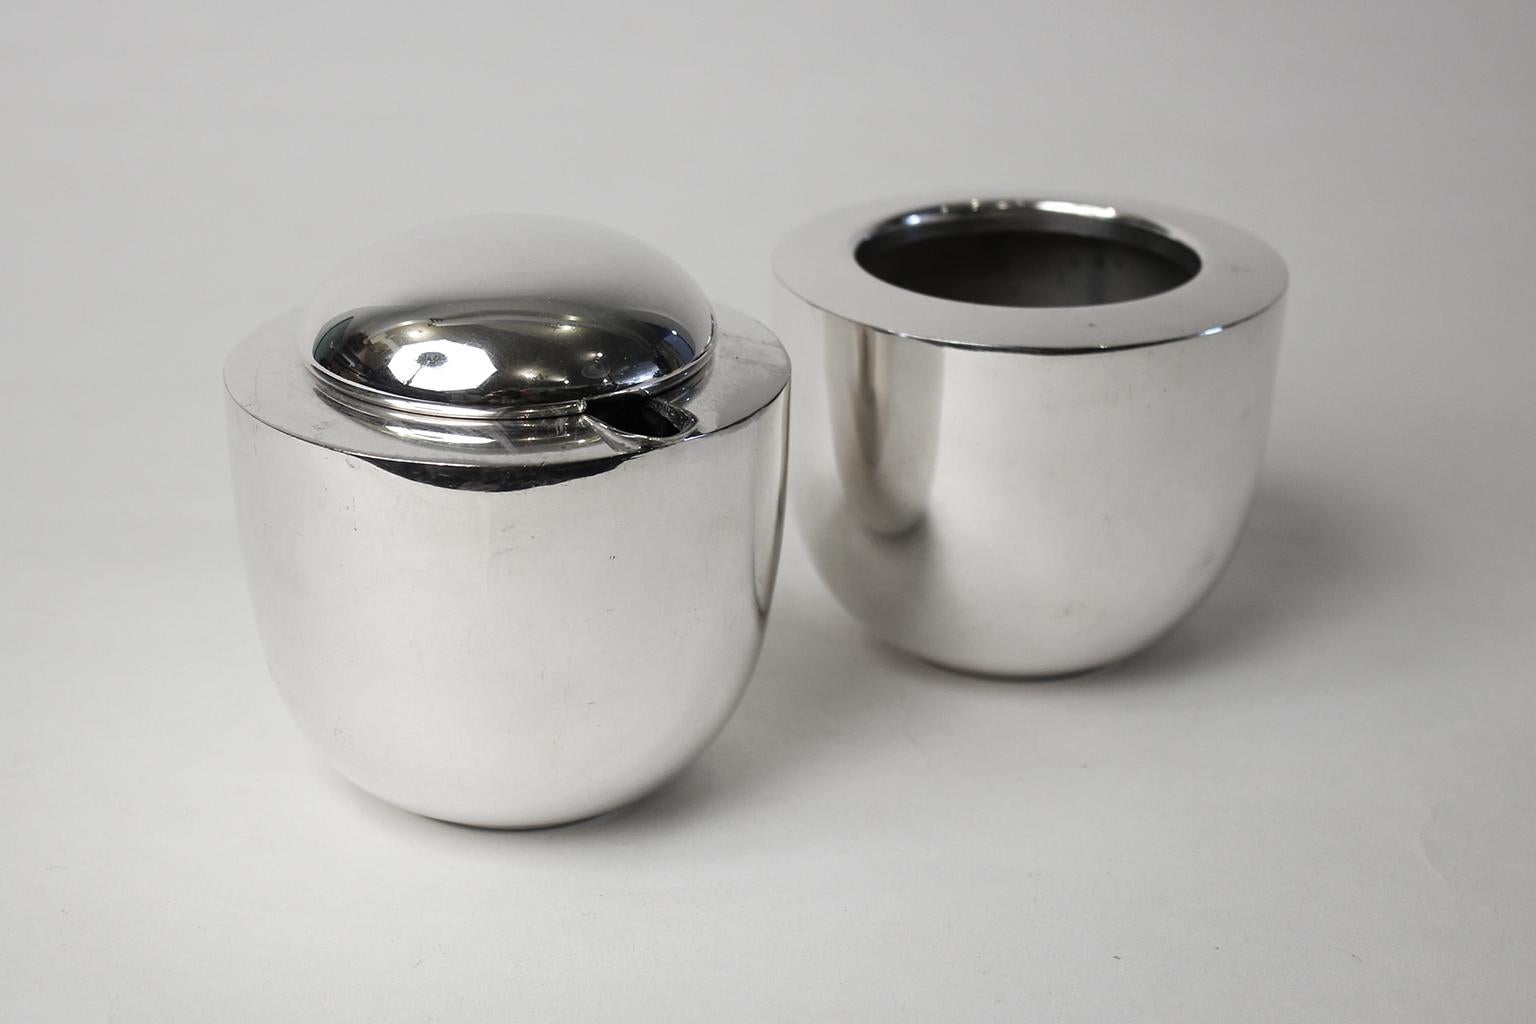 Fantastic modernist cream and sugar bowl designed by Vivanna Torun for Dansk Designs. Great sculptural design. Silver plated and hard to find accessory from this series. In excellent vintage condition.
Sugar measures 3.25